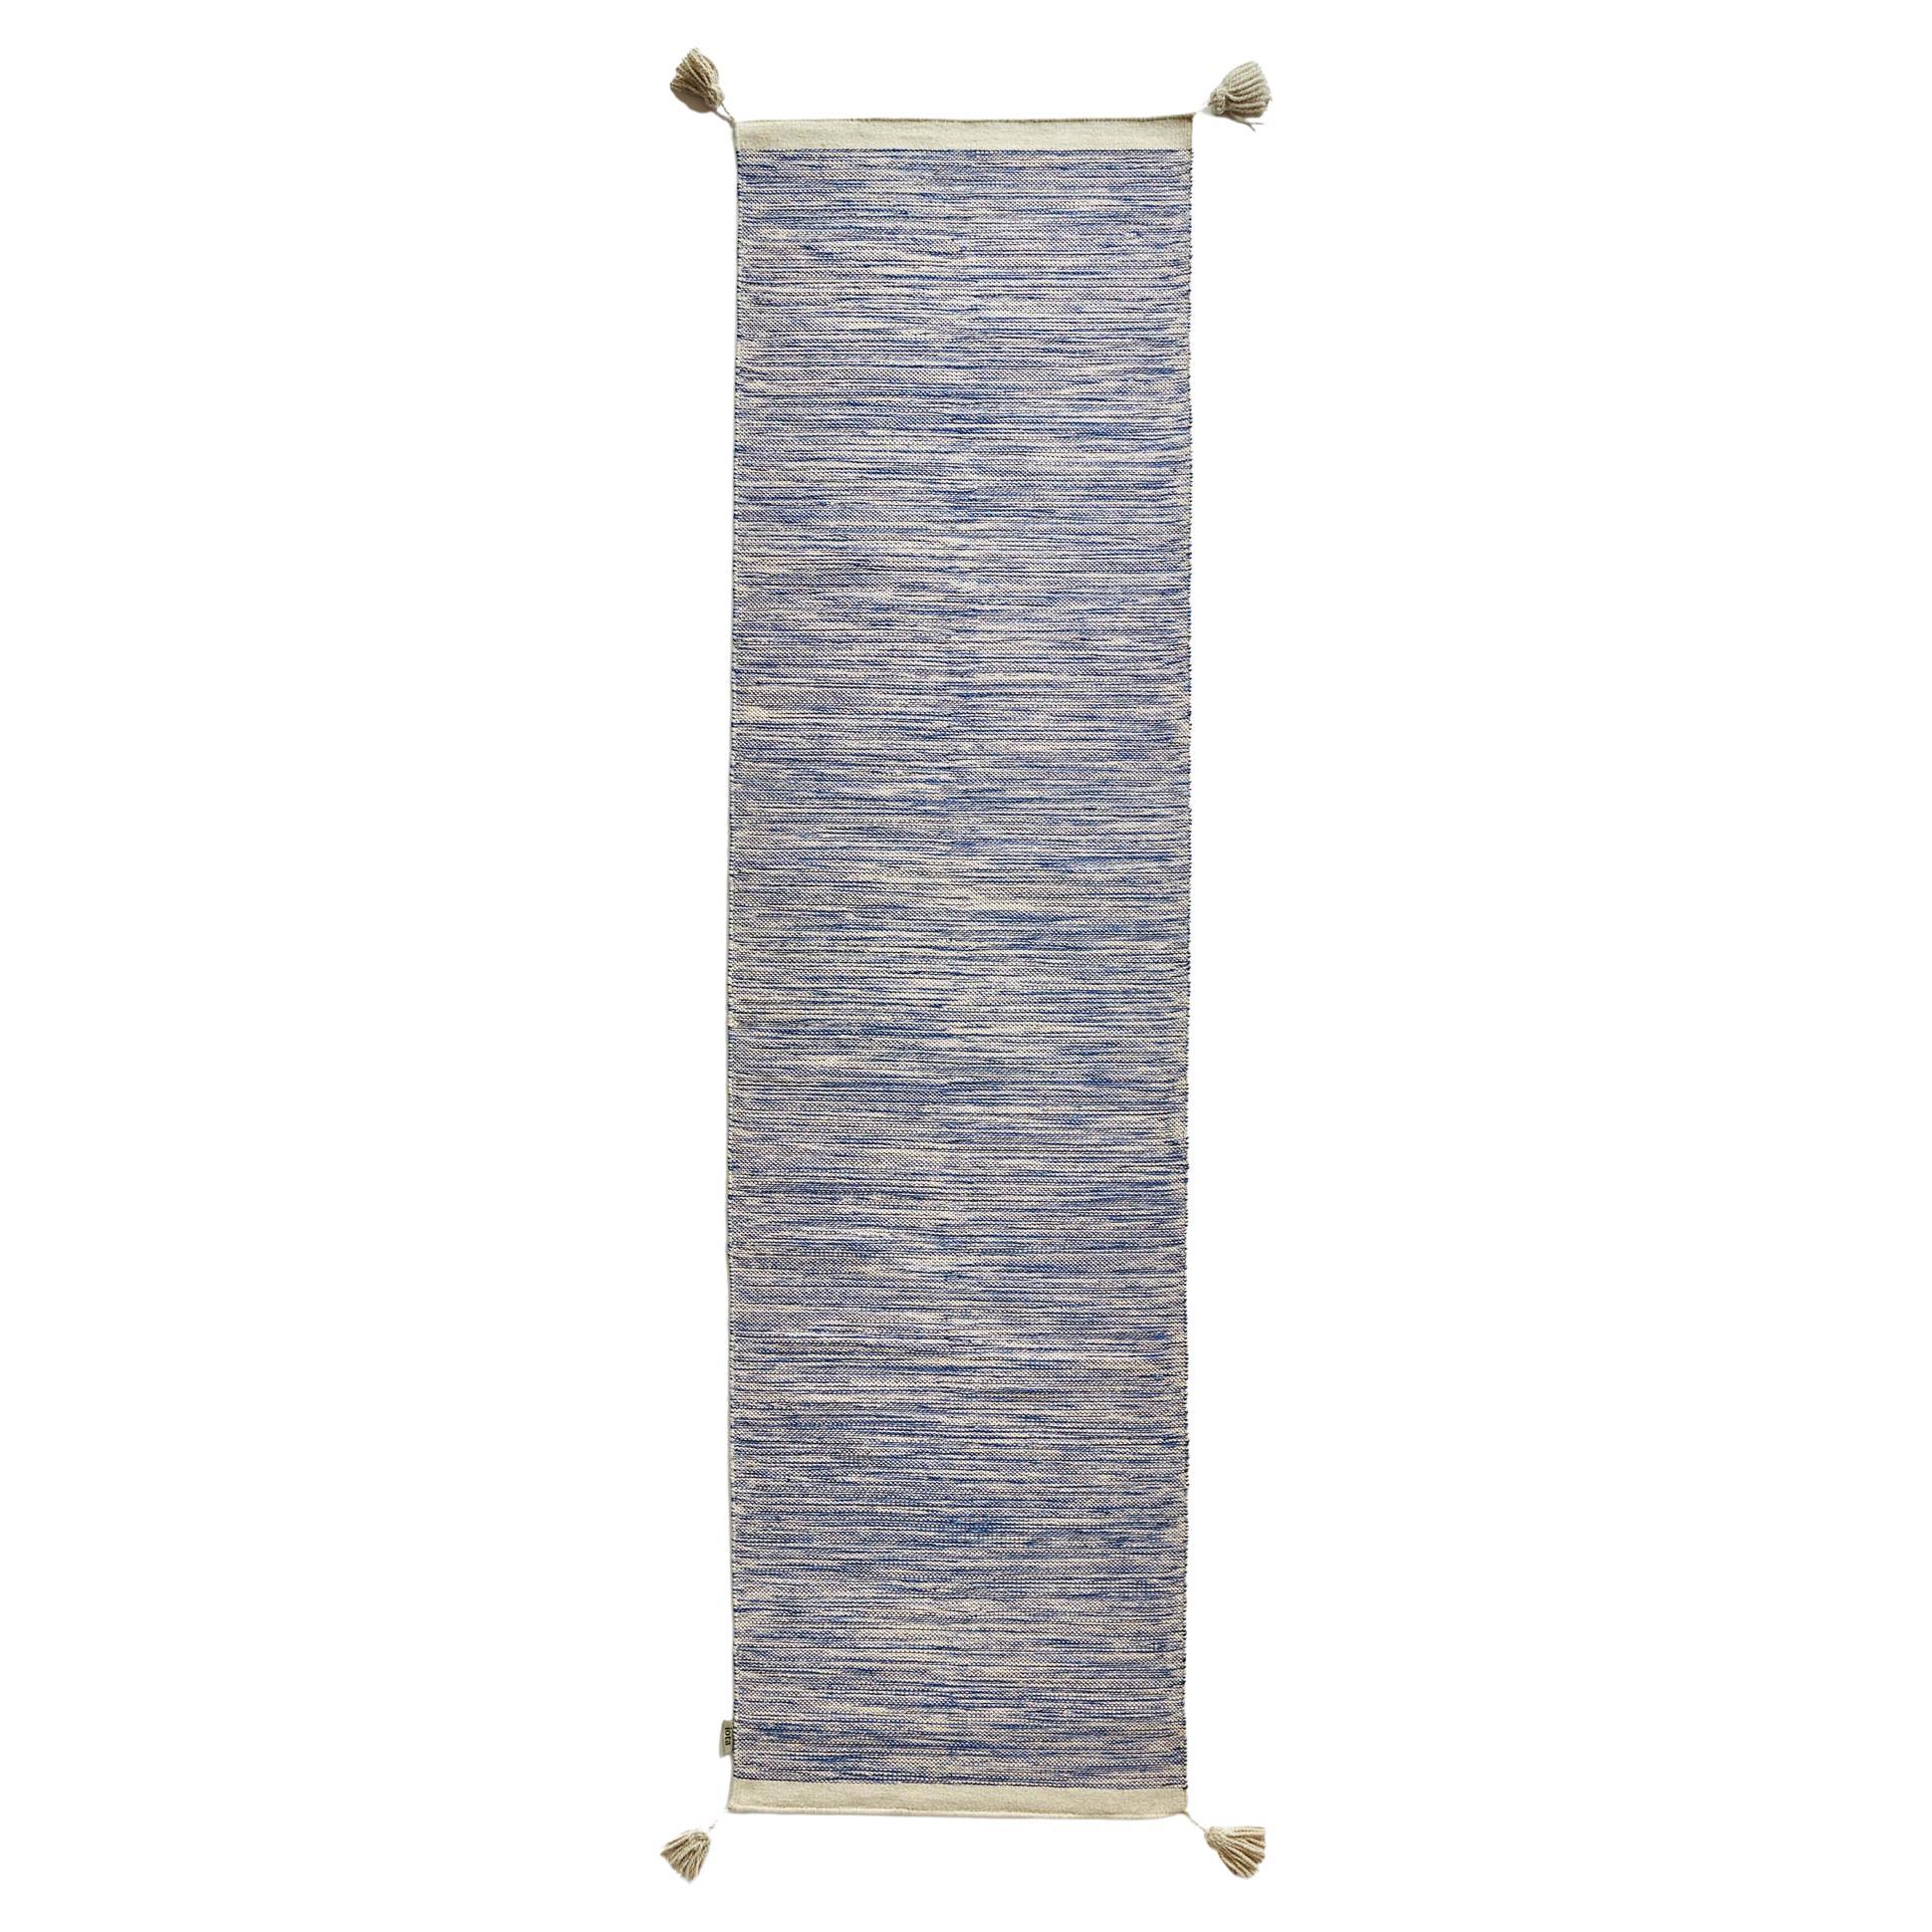 'Rivers' Handmade Woven Indoor Runner Rug in Blue Sand by Iota For Sale